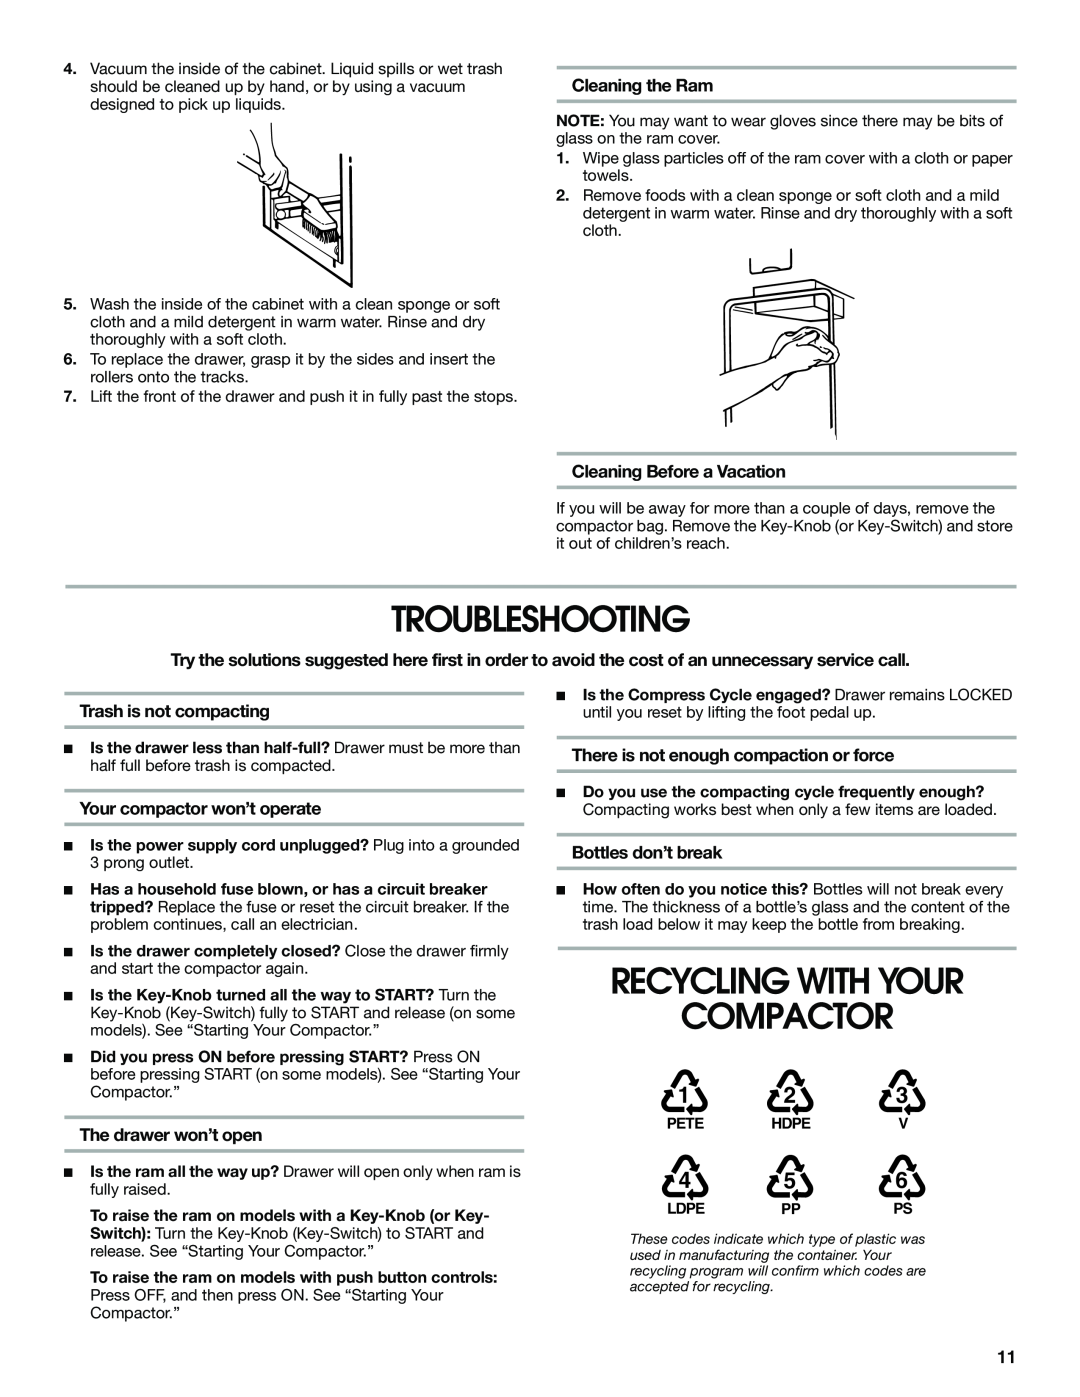 Jenn-Air W10242571A manual Troubleshooting, Recycling With Your Compactor, Cleaning the Ram, Cleaning Before a Vacation 